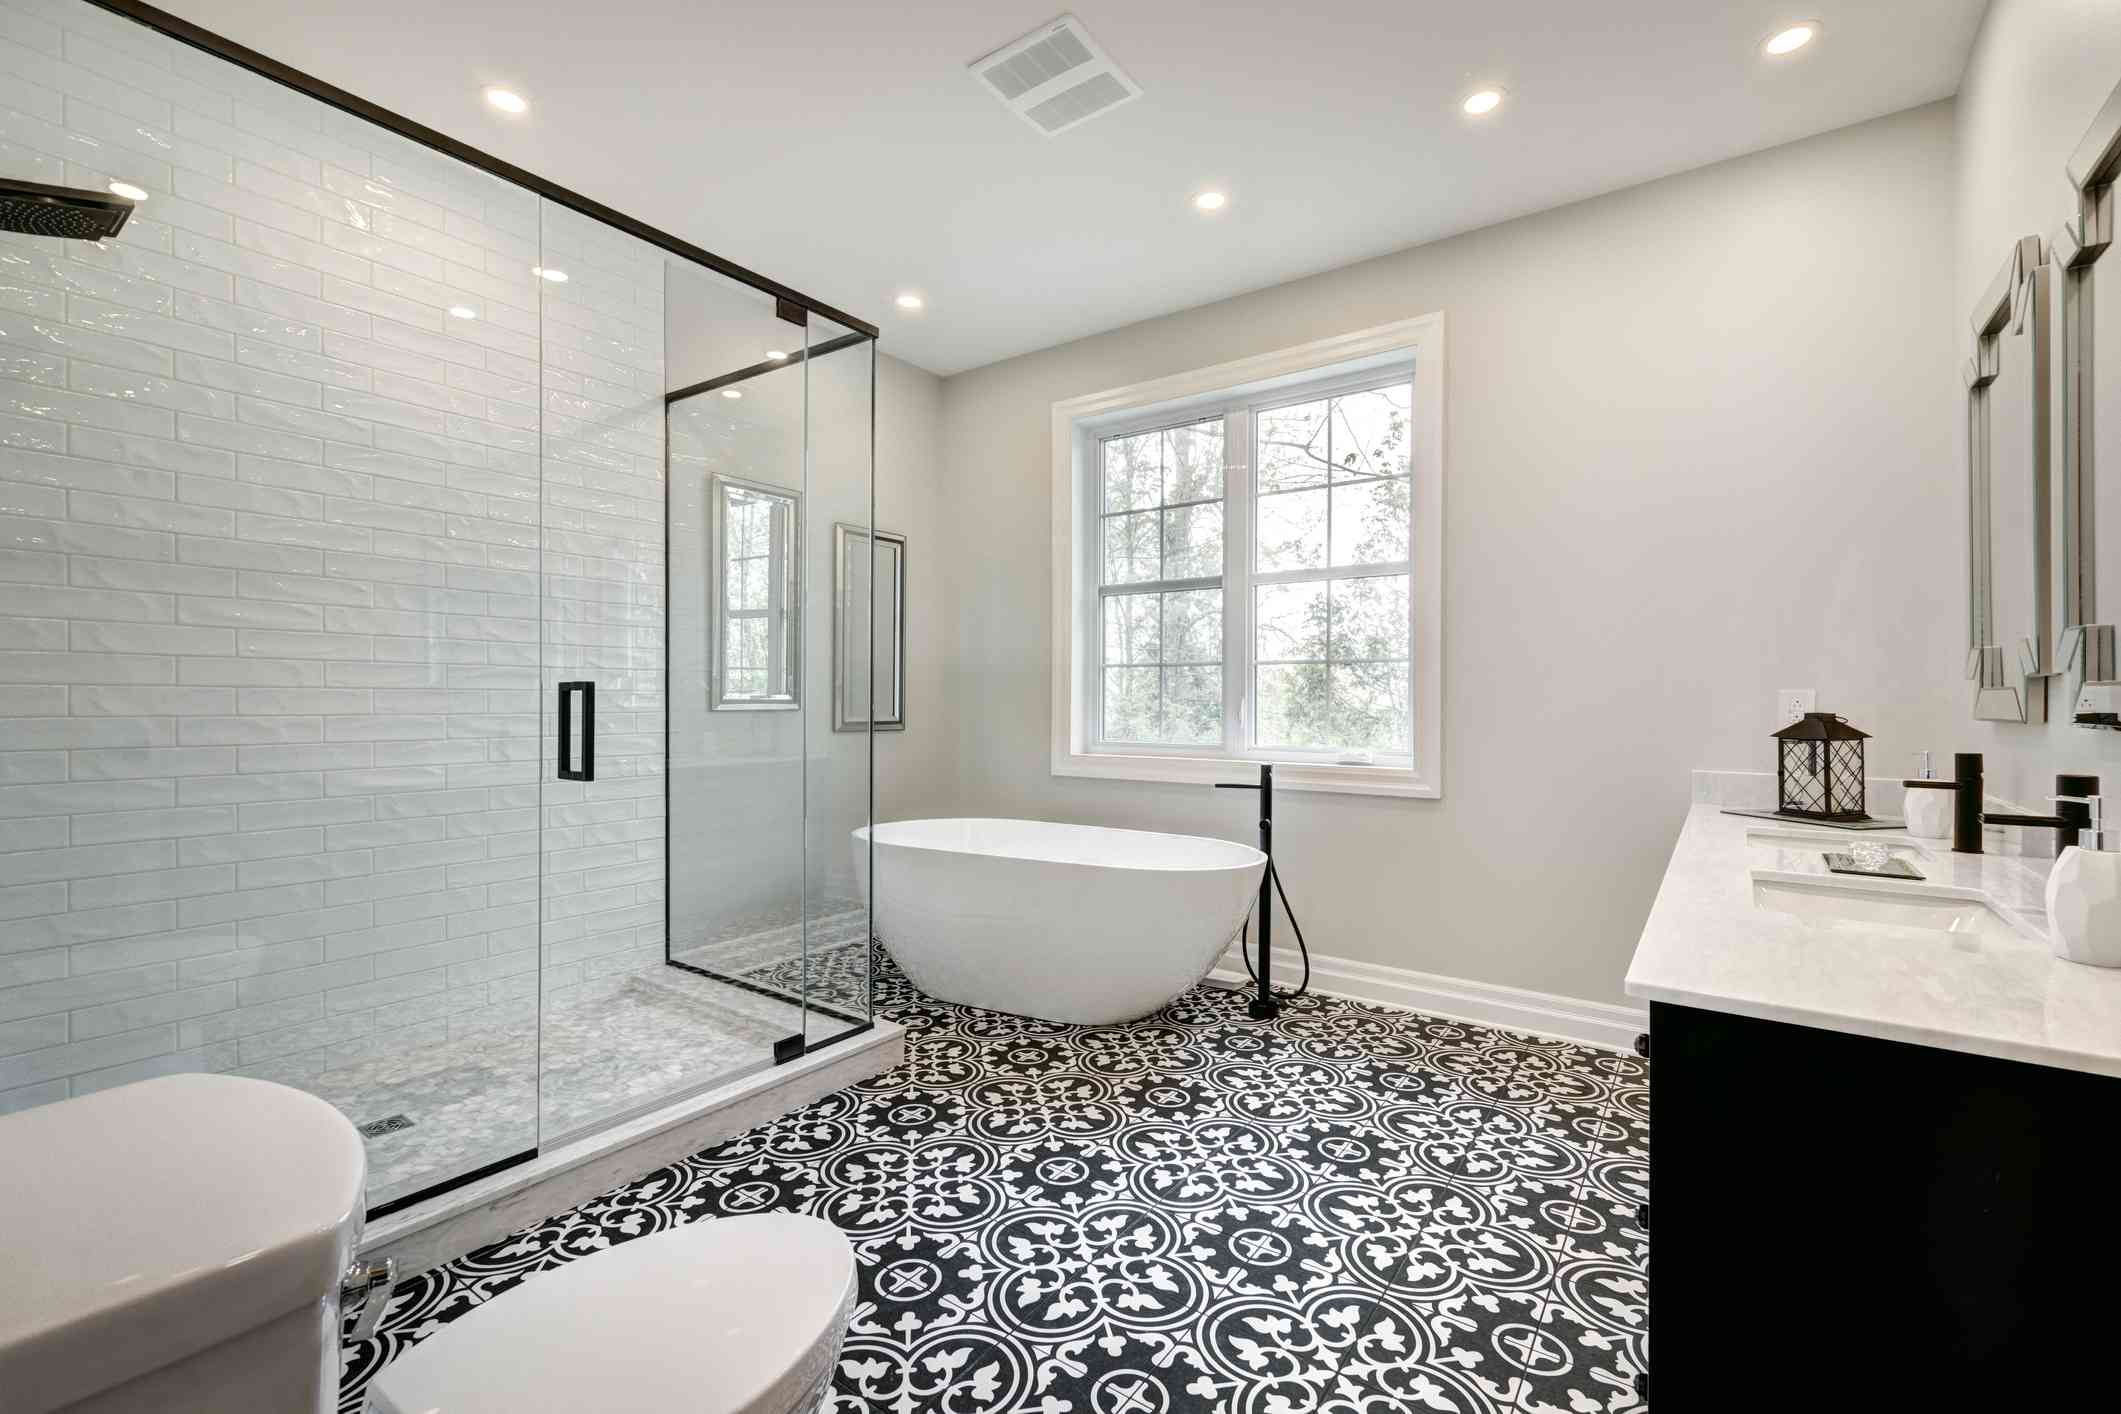 Home Renovations in Calgary: Western Bathrooms with Bath and countertop